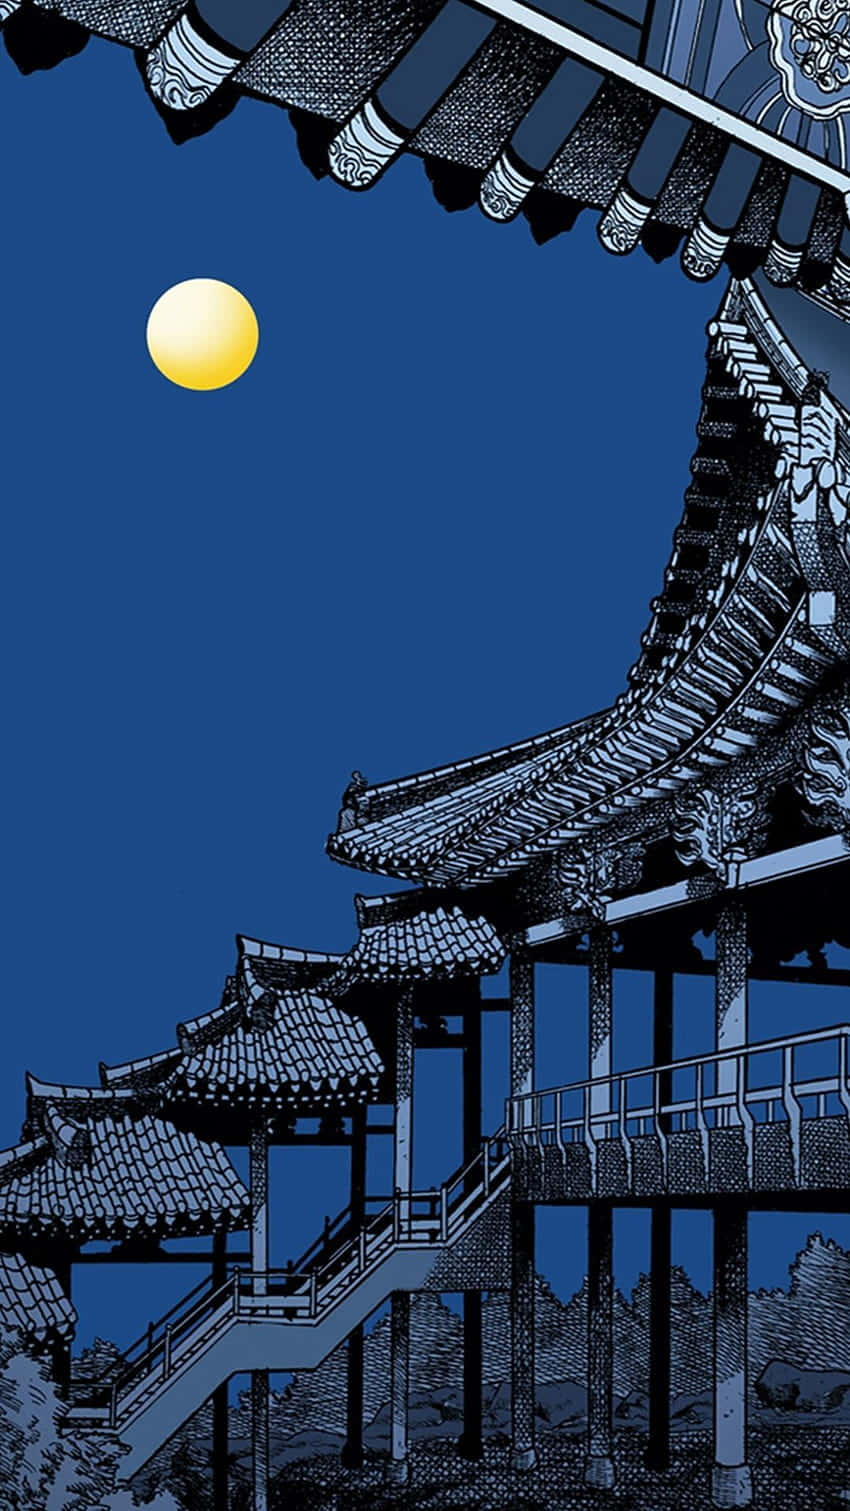 Traditional Chinese Architectureat Night Wallpaper